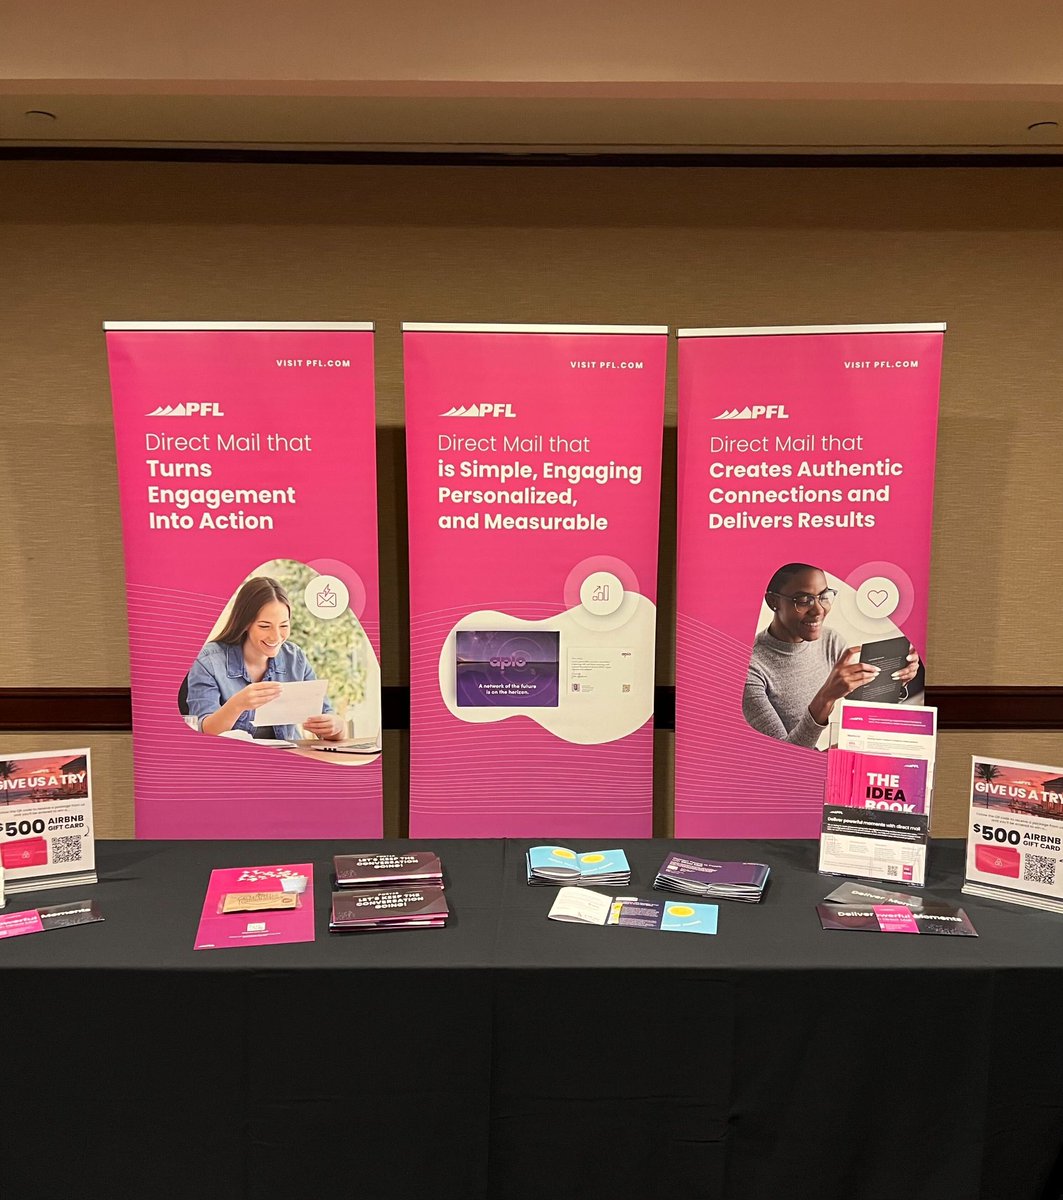 PFL's Porter Sproul and Brian Rogers are showing off our latest results-driven direct mail strategies at the 2023 MedDev eMarketing Summit. There's still plenty of time to connect and learn today at the event. #meddev #events #directmail #PFL #marketingsummit